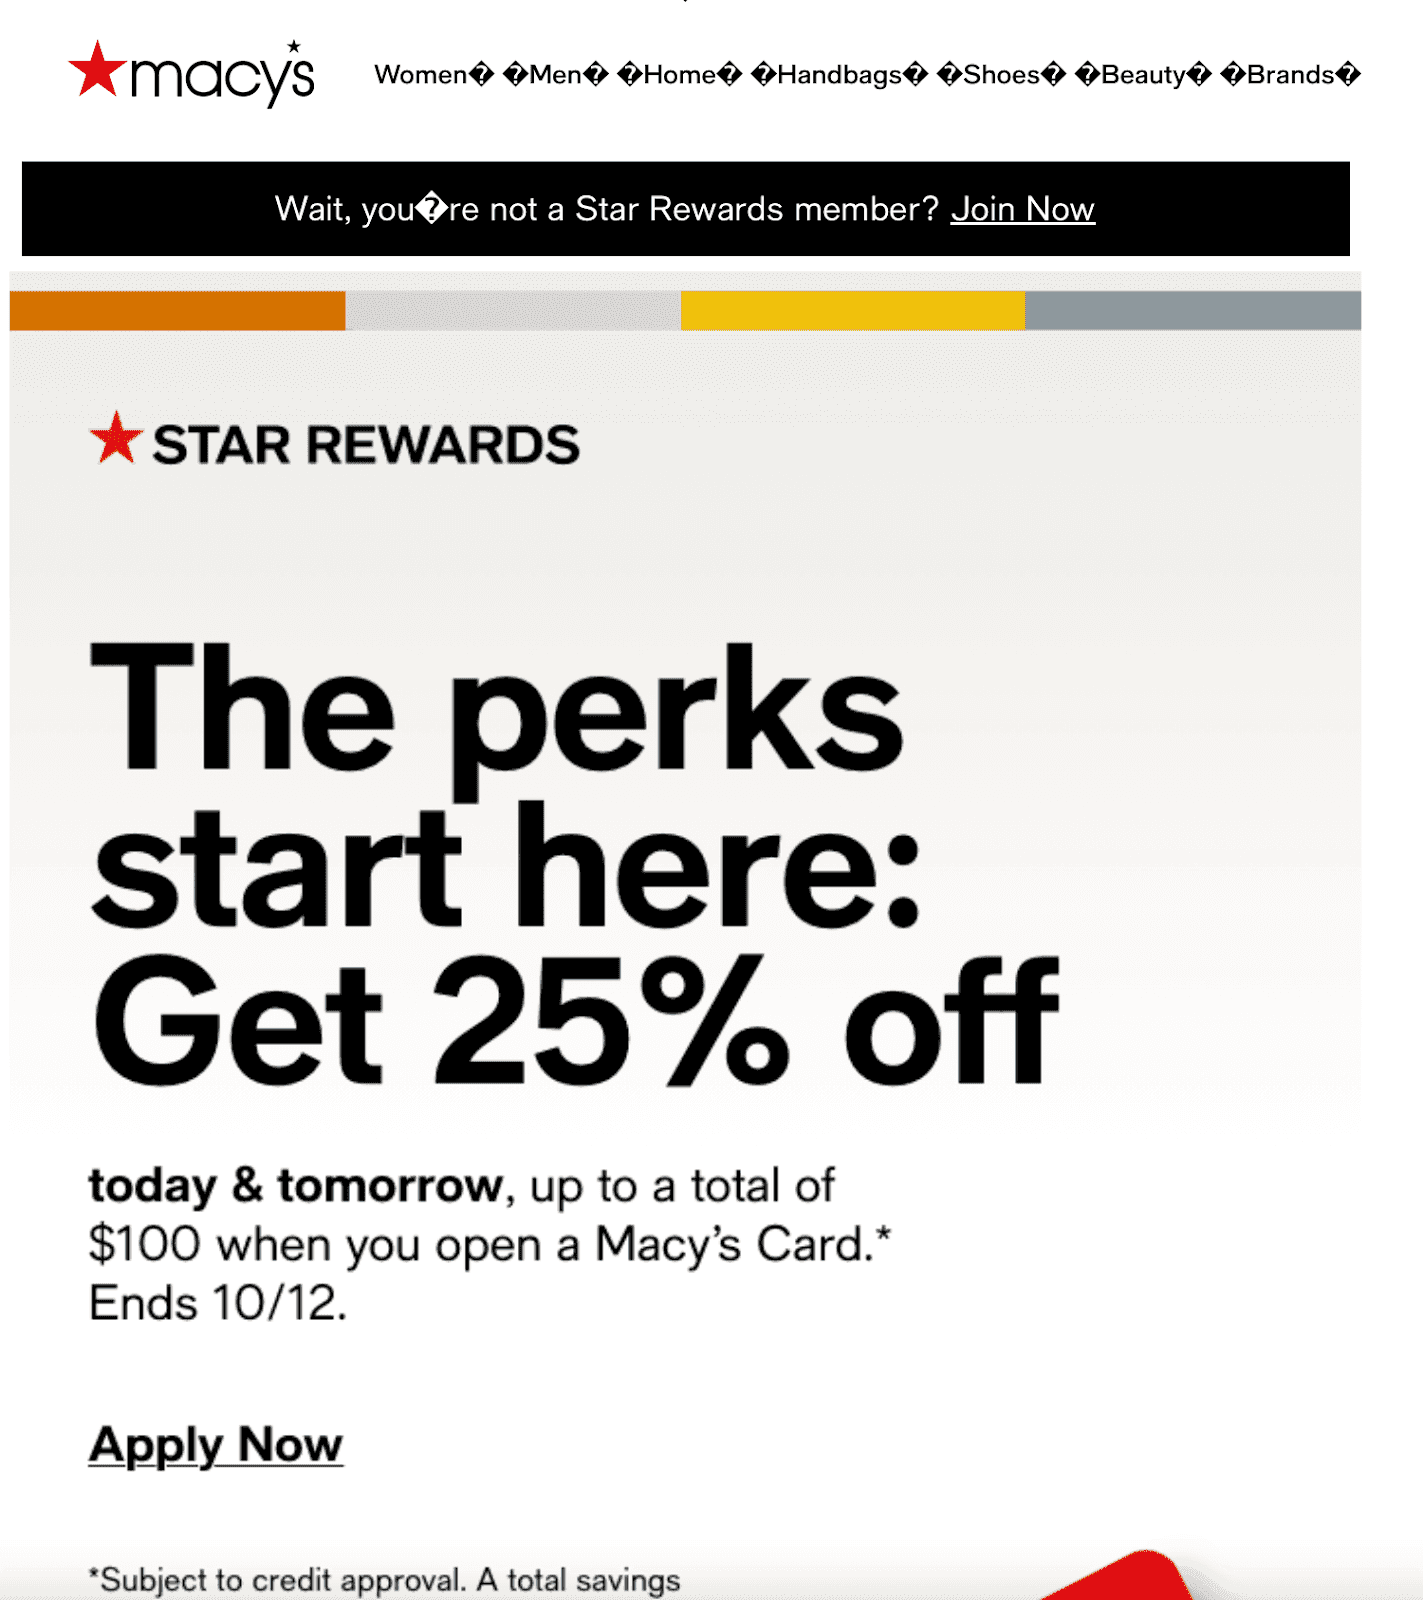 Macy's discount email offer